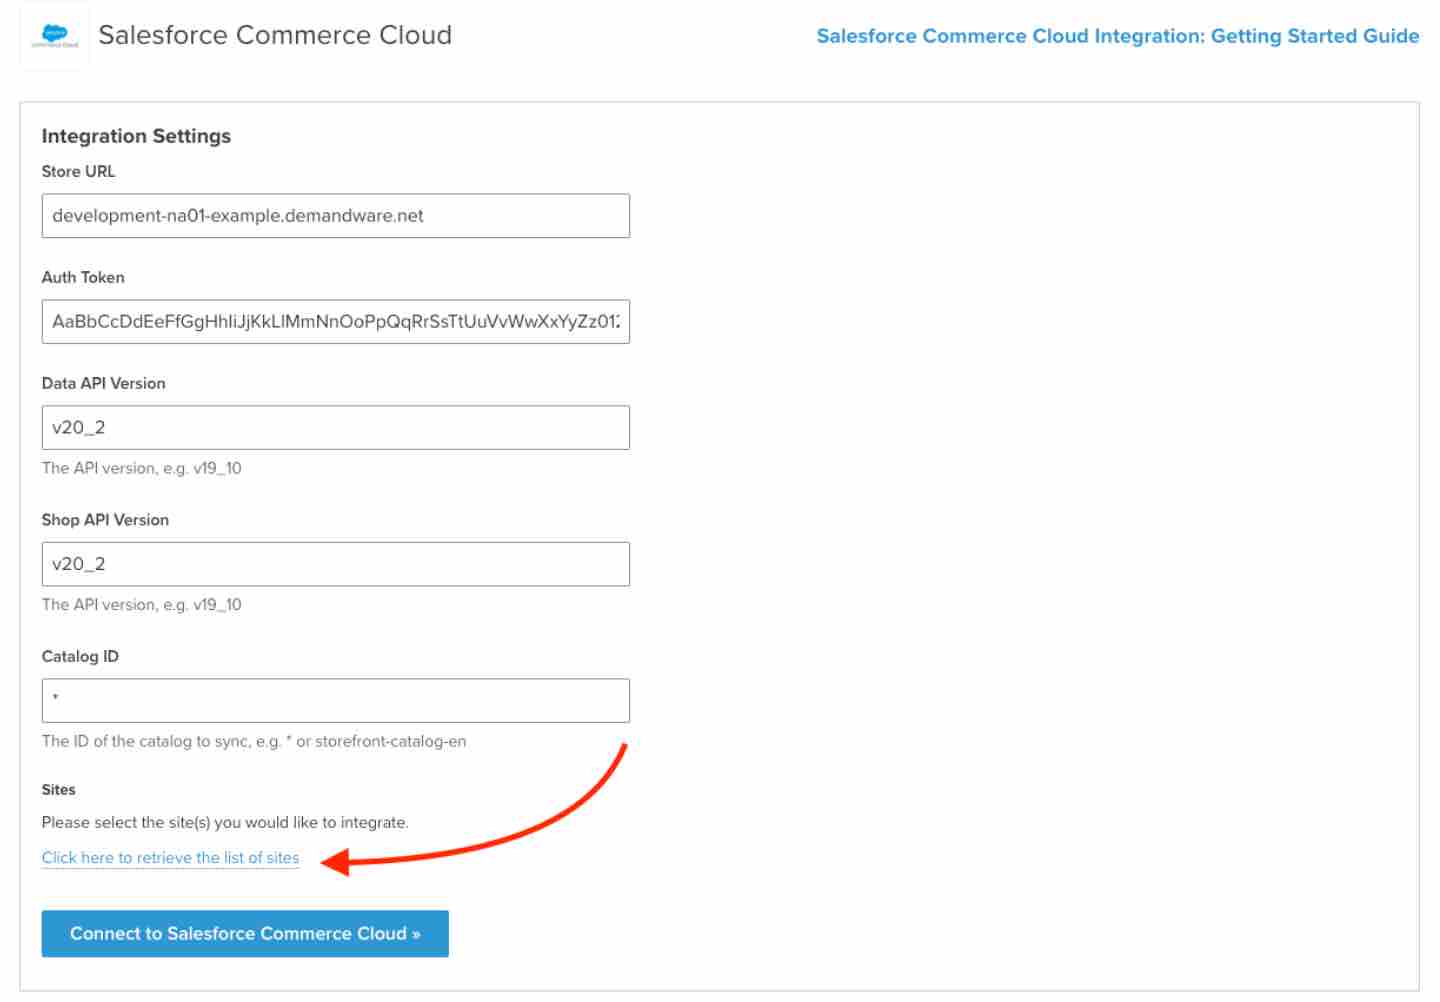 Salesforce Commerce Cloud integration settings page in Klaviyo with link to site list in blue